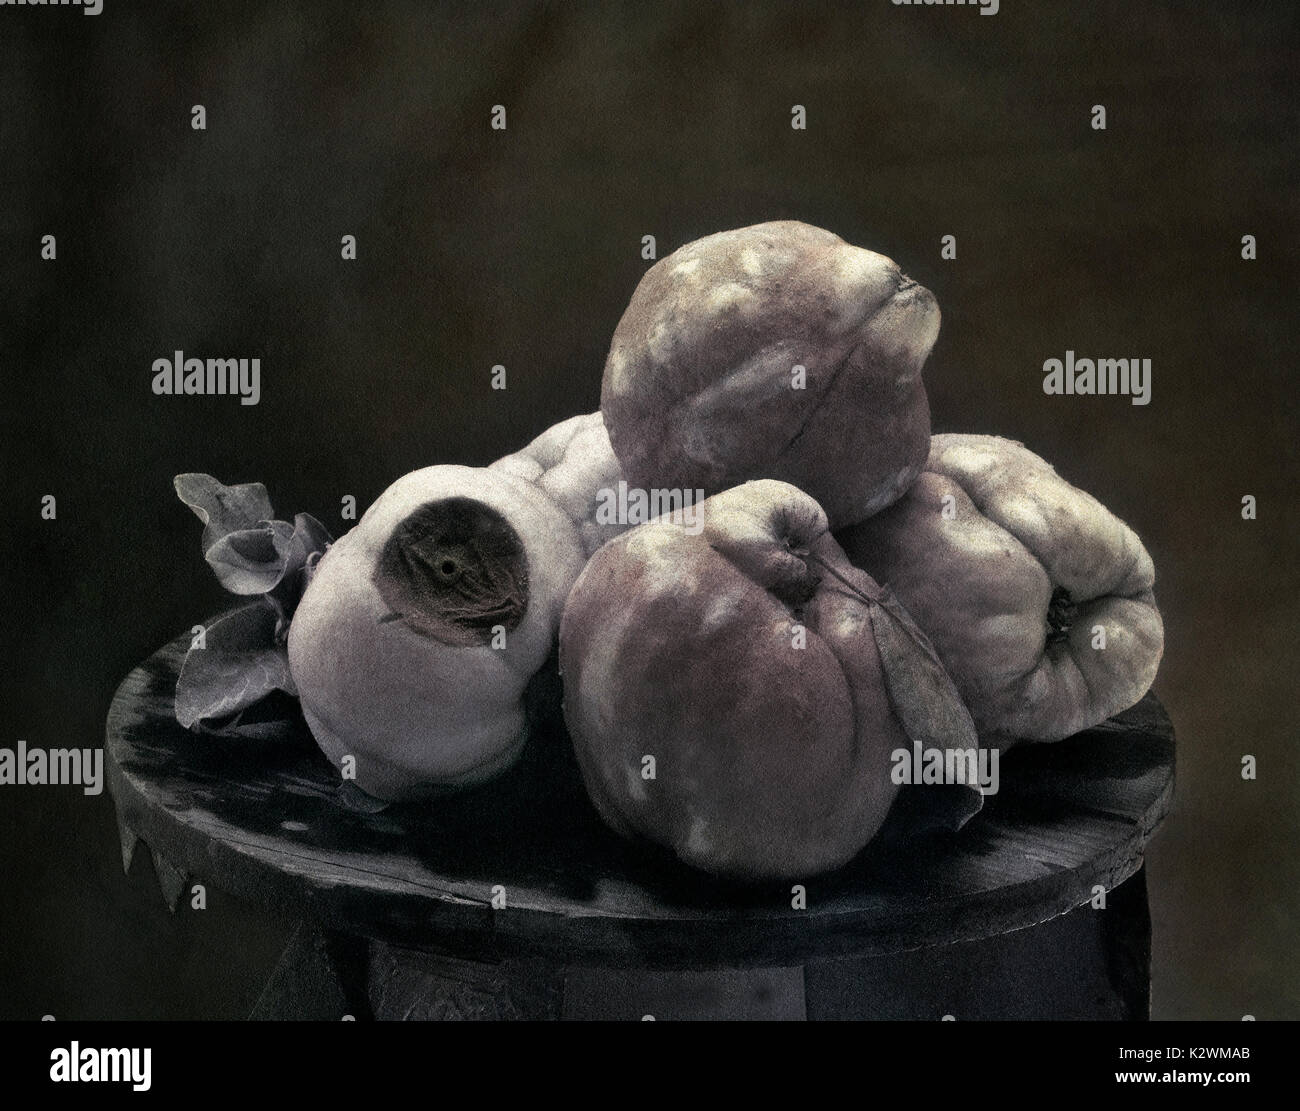 STILL LIFE PHOTO OF 5 QUINCES, ONE IS DYING. THE PHOTO REPRESENTS A FAMILY WHERE DEATH IS ALWAYS PRESENT, LIFE AND DEATH ANALOGY Stock Photo